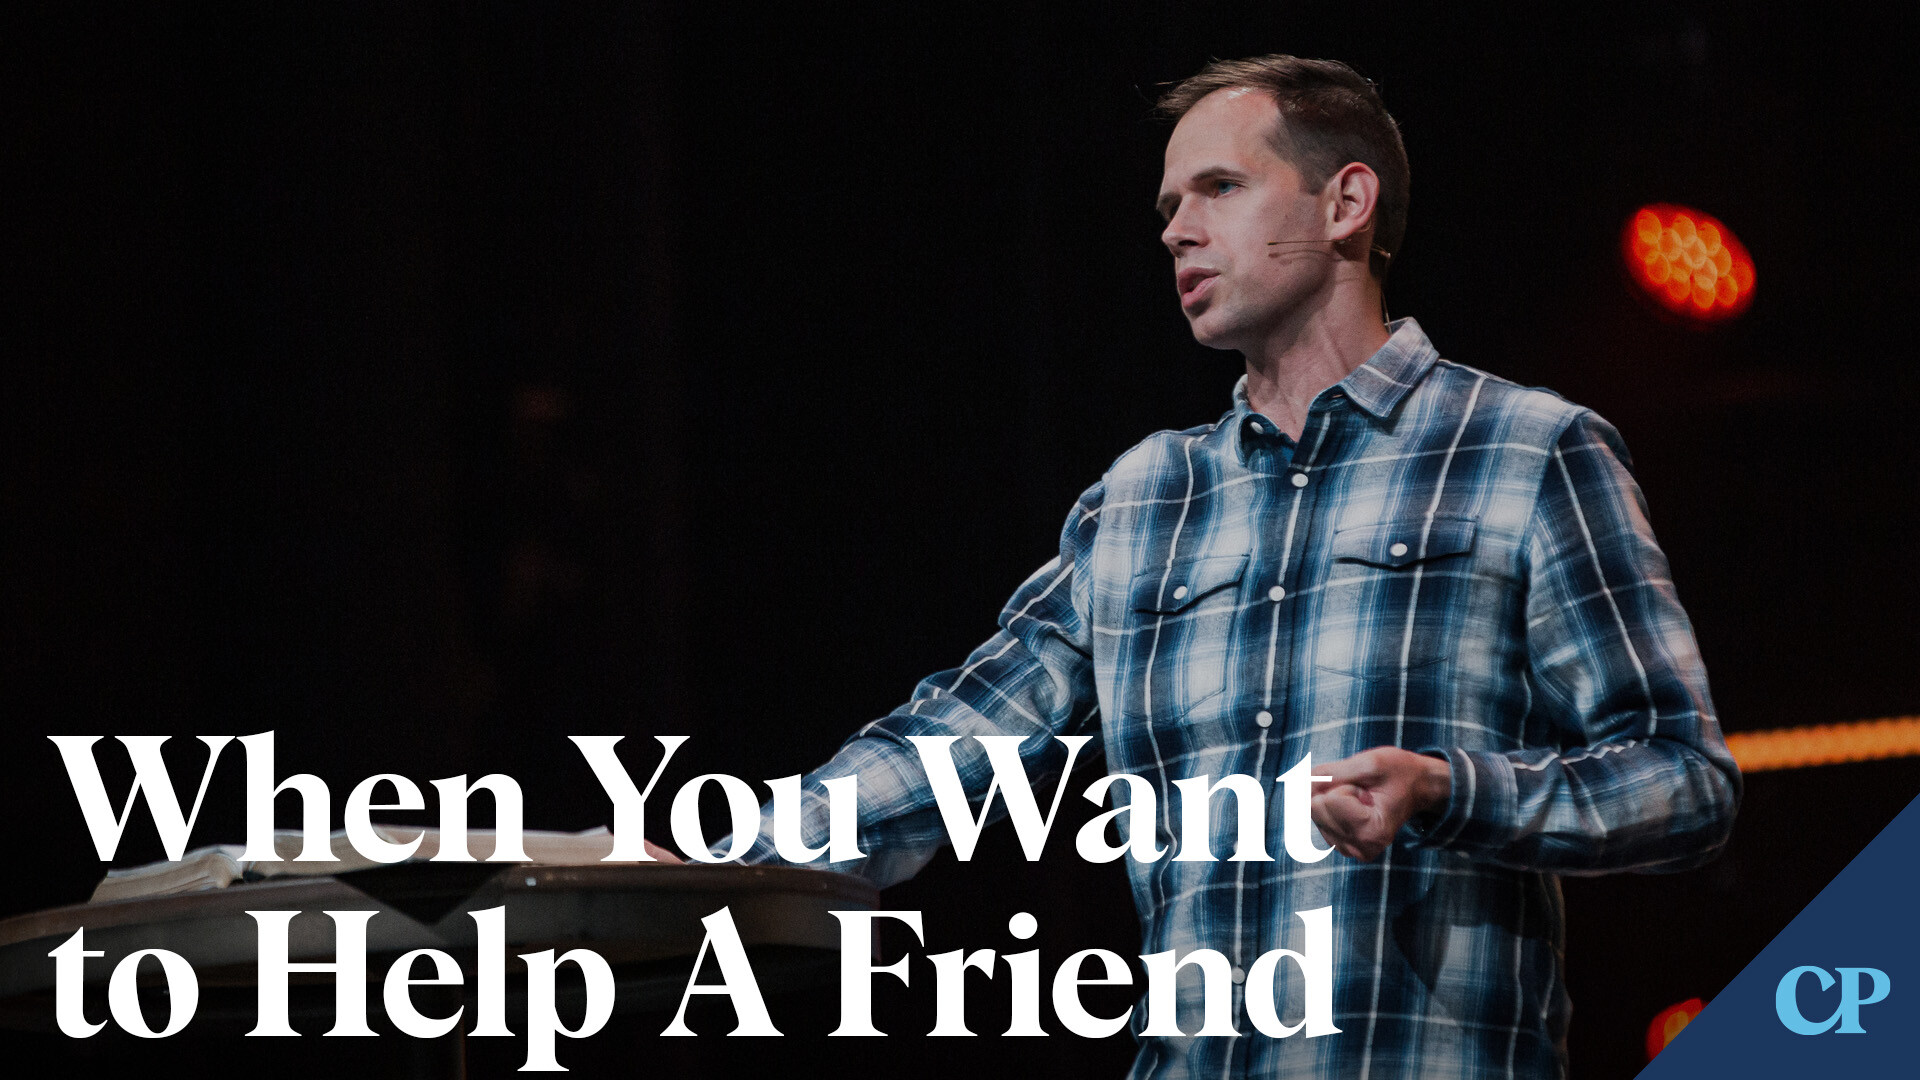 View Message: When You Want to Help a Friend